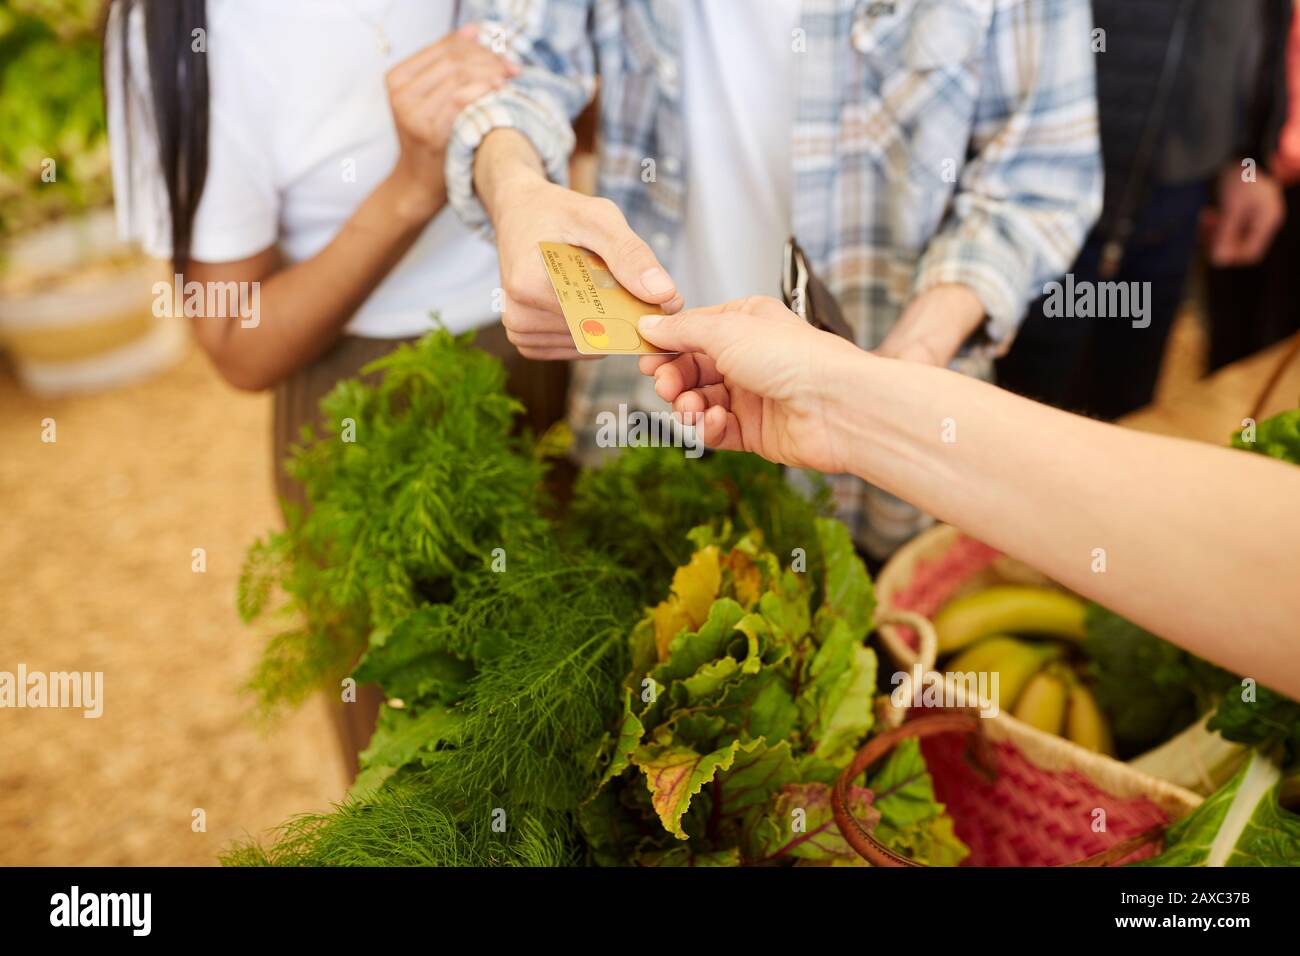 Customer paying for vegetables with credit card at farmer’s market Stock Photo